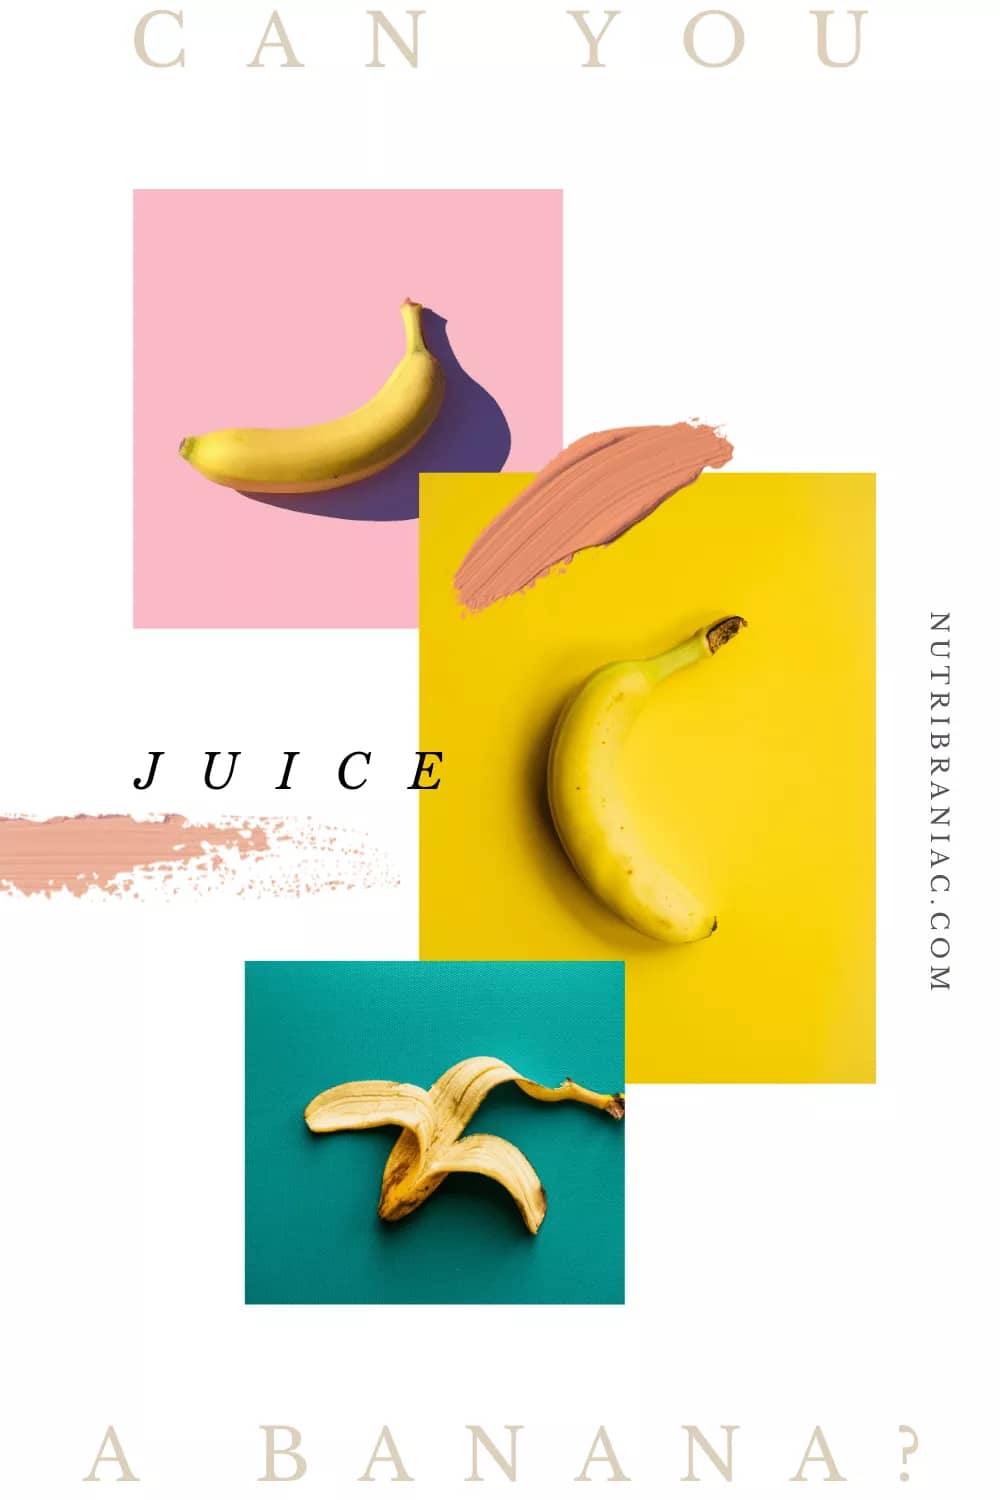 Three images of bananas each behind a pink, yellow, and blue background with text overlay "Can You Juice a Banana"